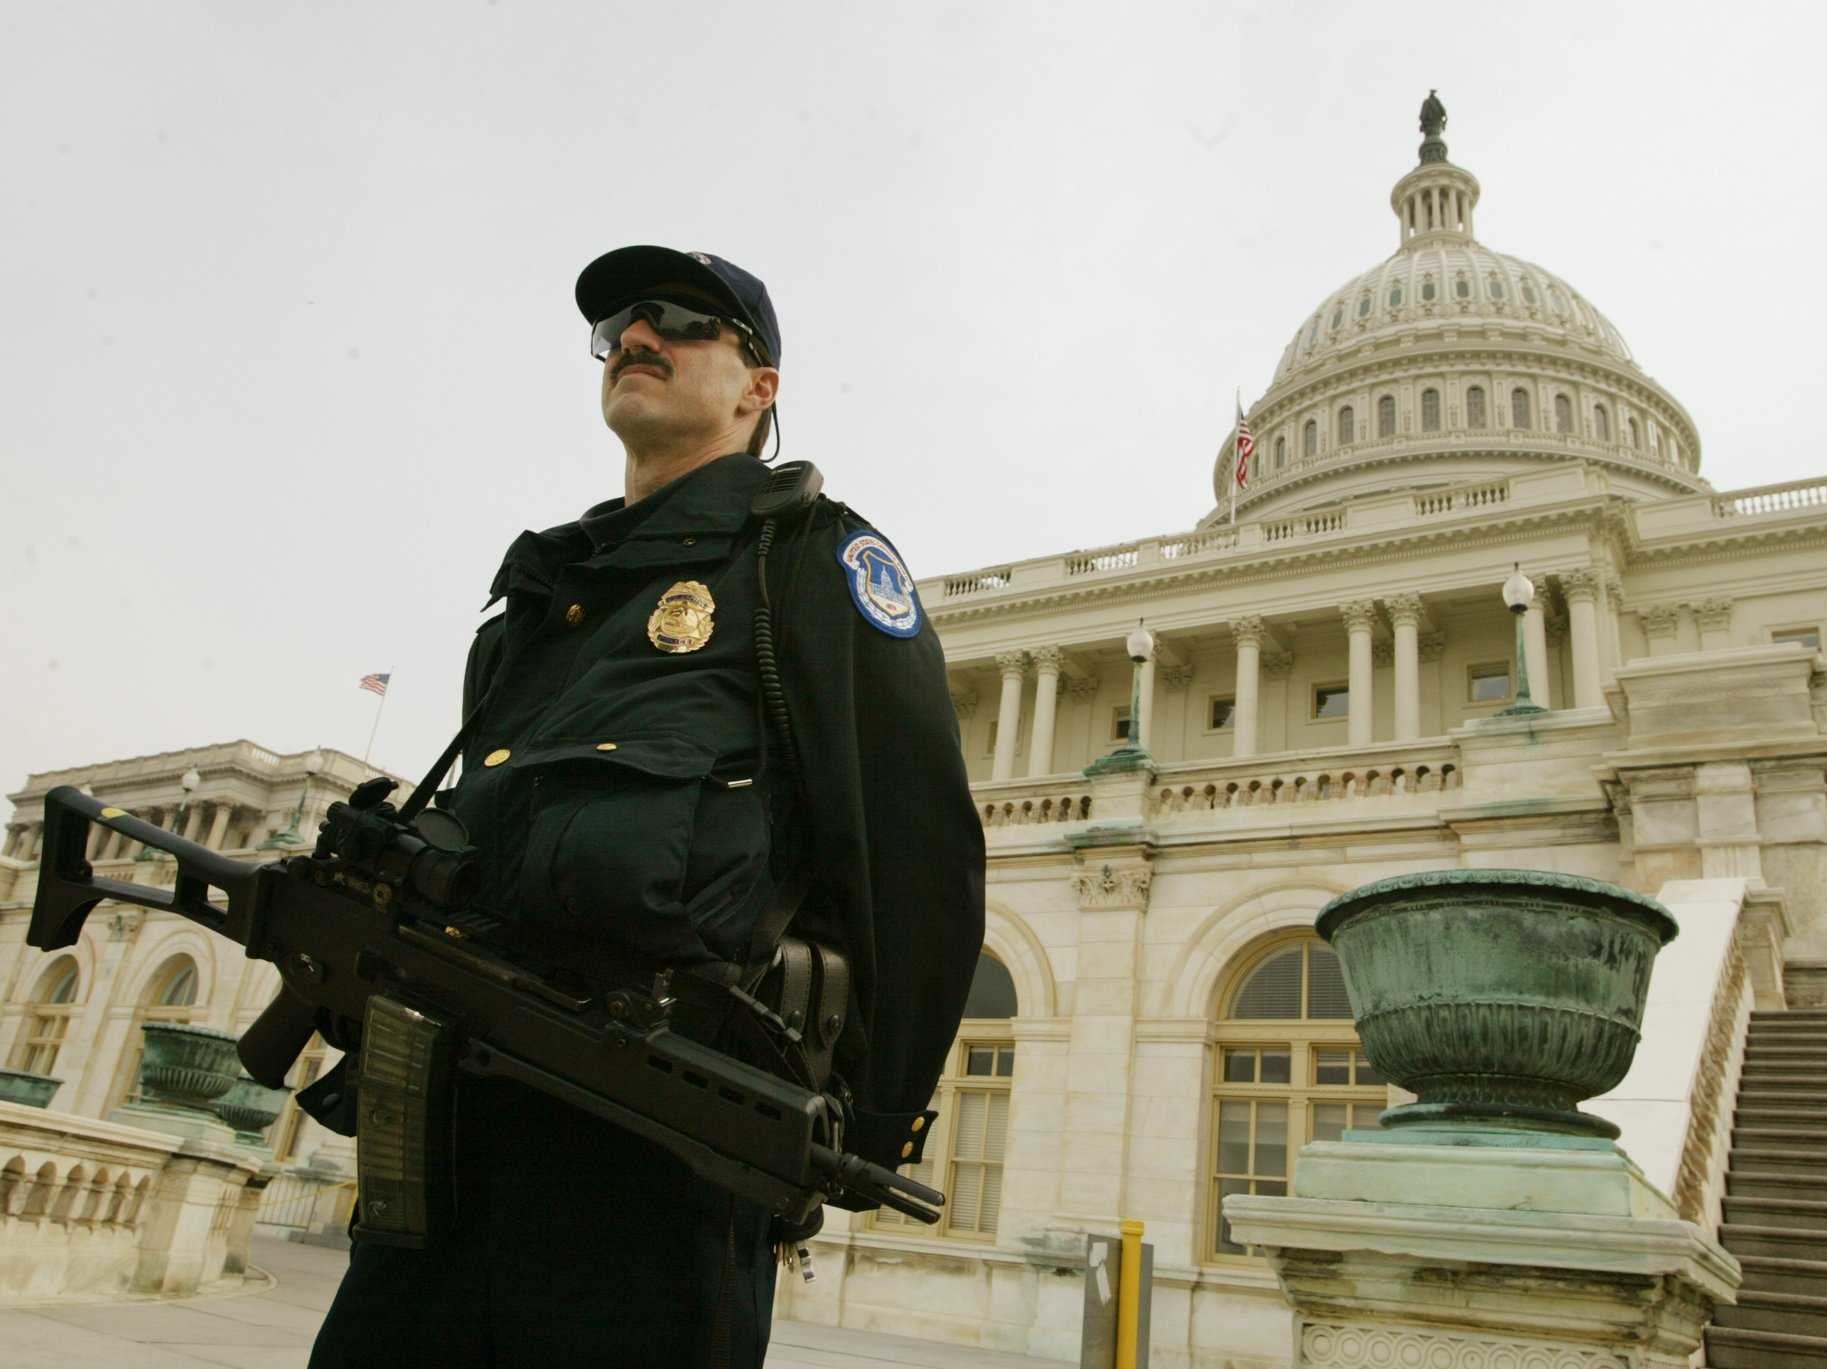 Homeland Security officer stands guard with rifle